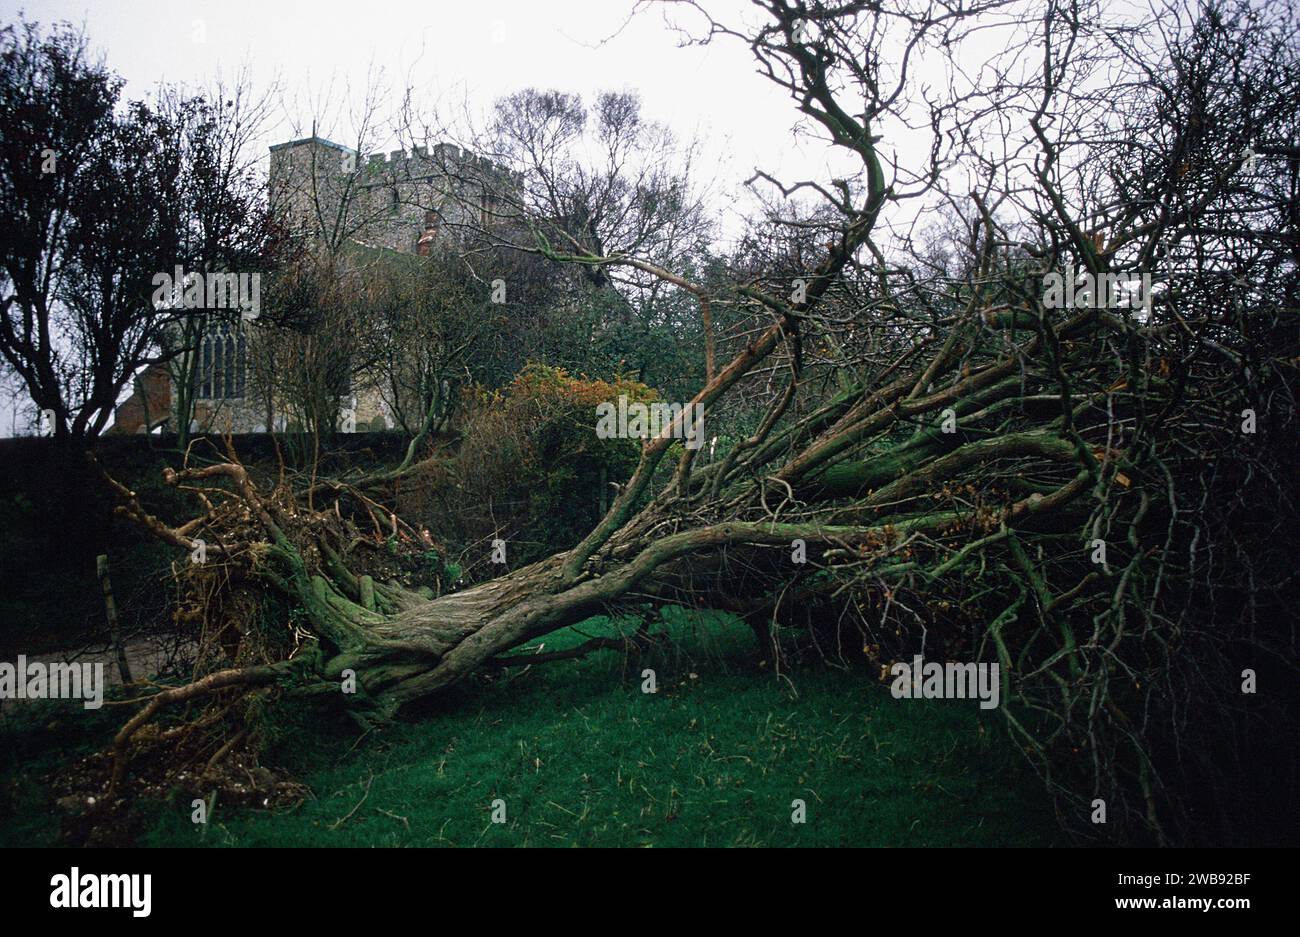 Uprooted tree shortly after the Great Storm of 1987 at Boughton Aluph, near Ashford, Kent, South East England Stock Photo